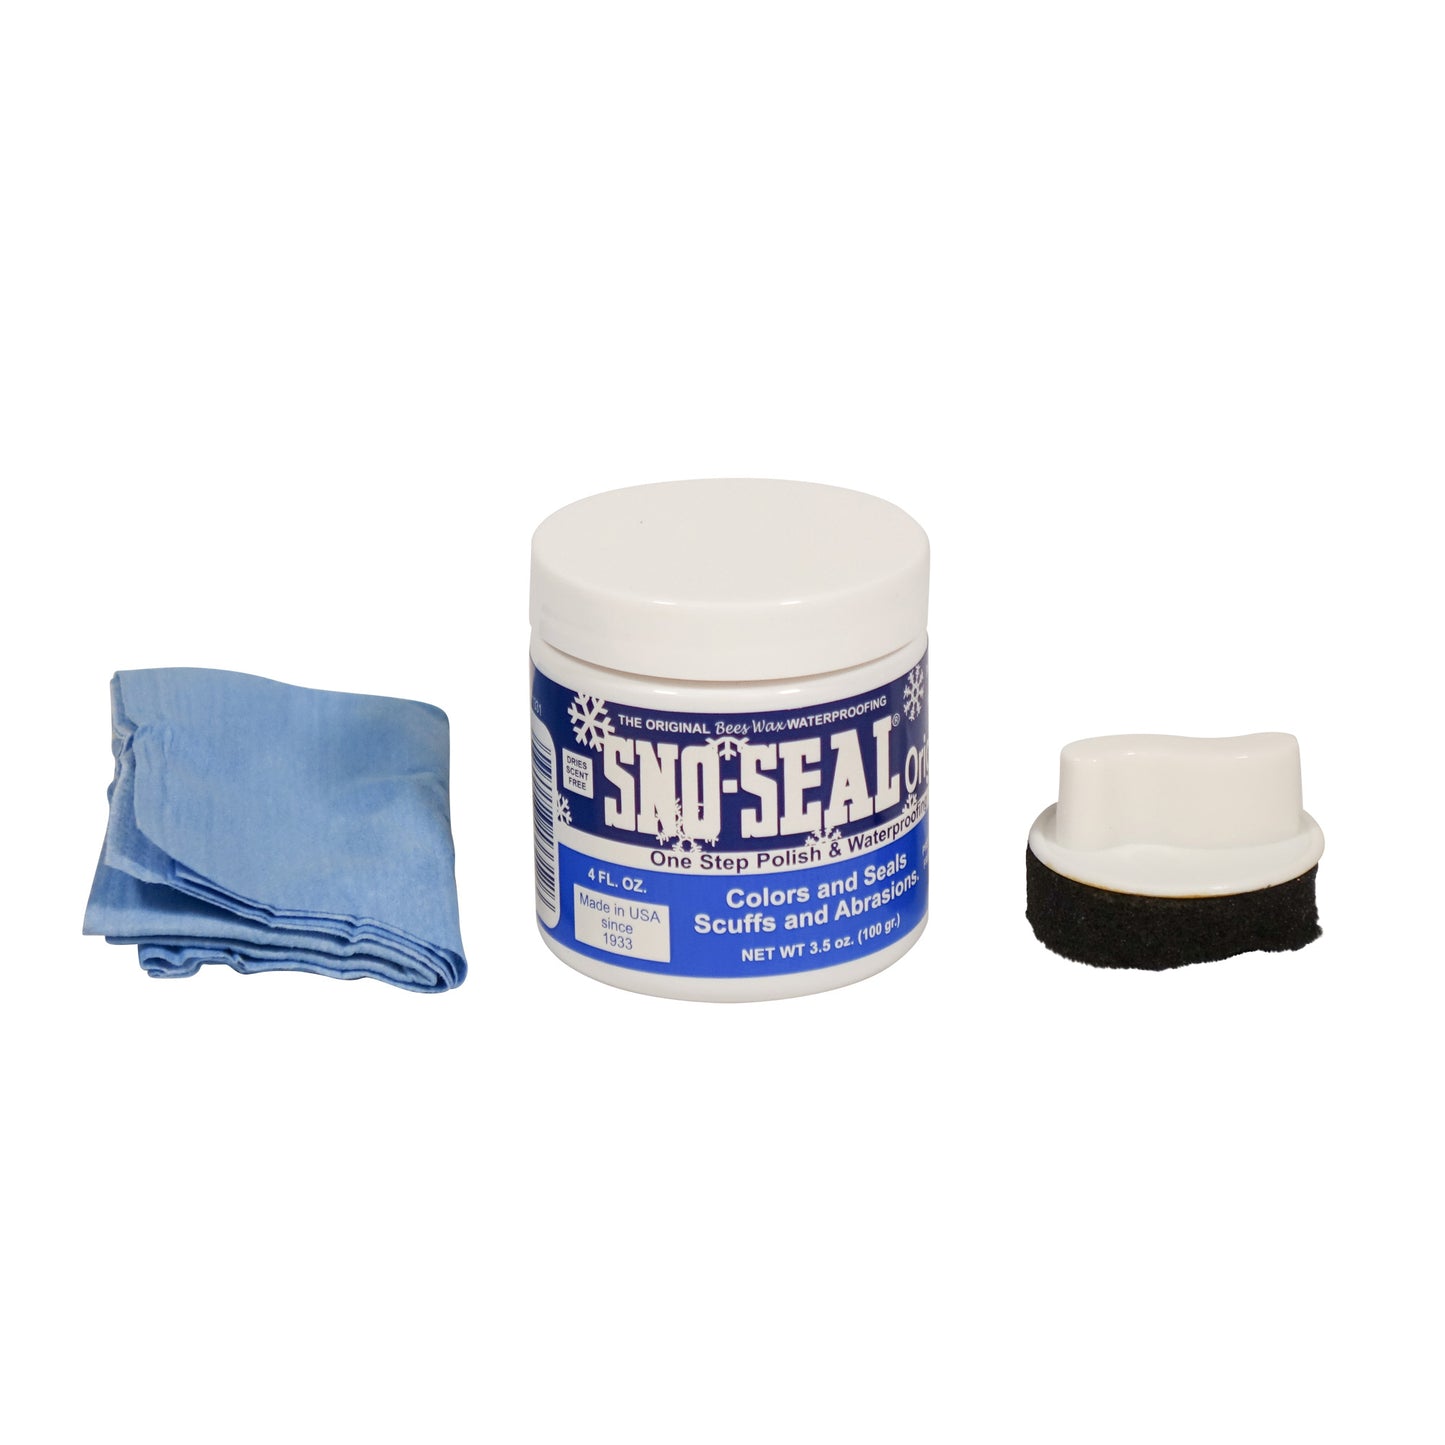 A jar of Mainers SNO-SEAL with Applicator beeswax sealant and a blue cloth.